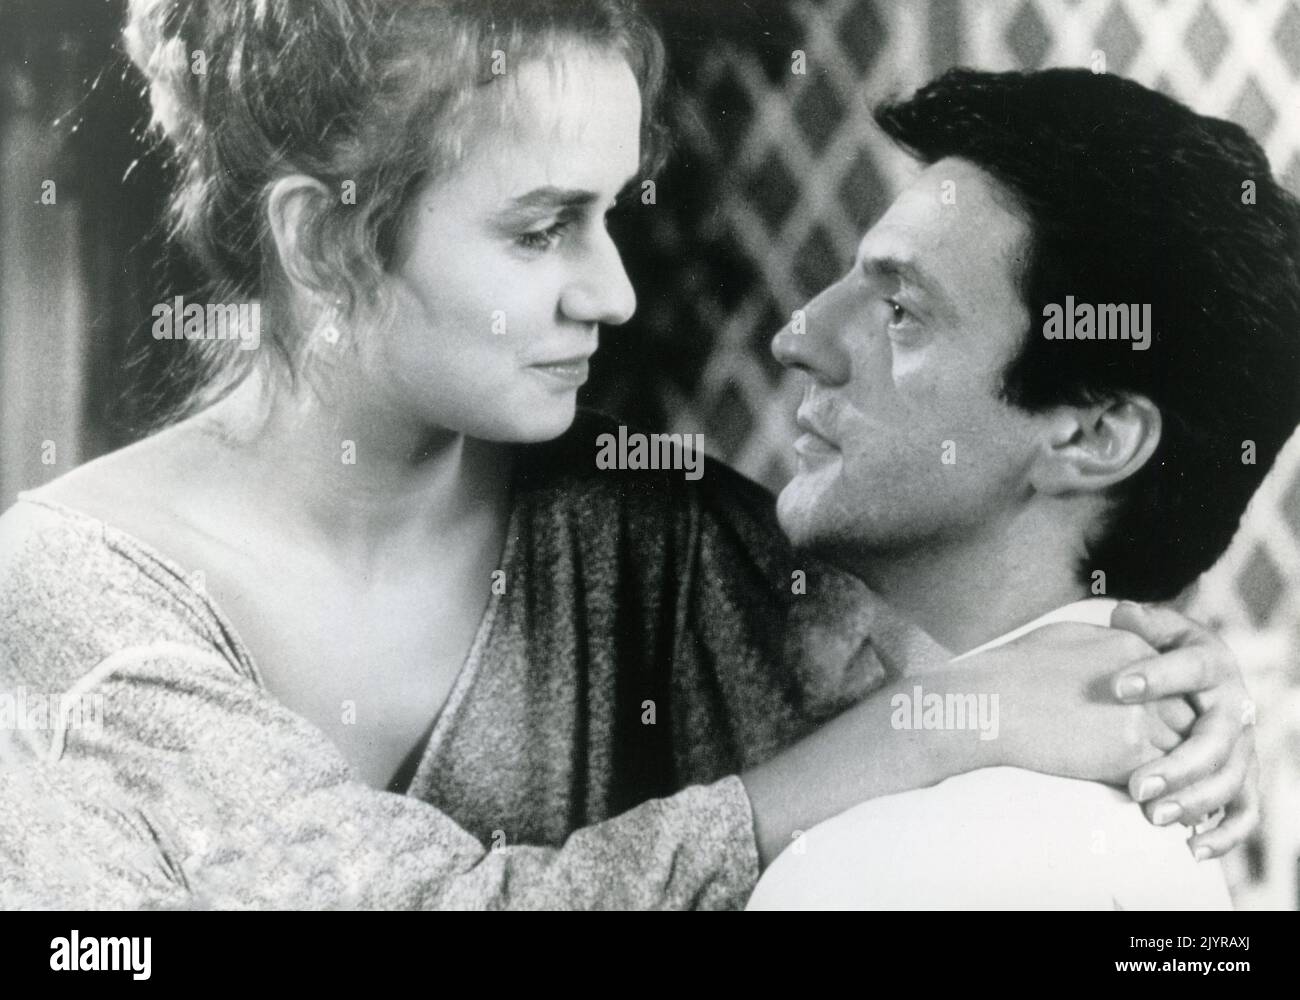 French actress Sandrine Bonnaire and actor Daniel Auteuil in the movie A Few Days with Me (Quelques jours avec moi), France 1988 Stock Photo